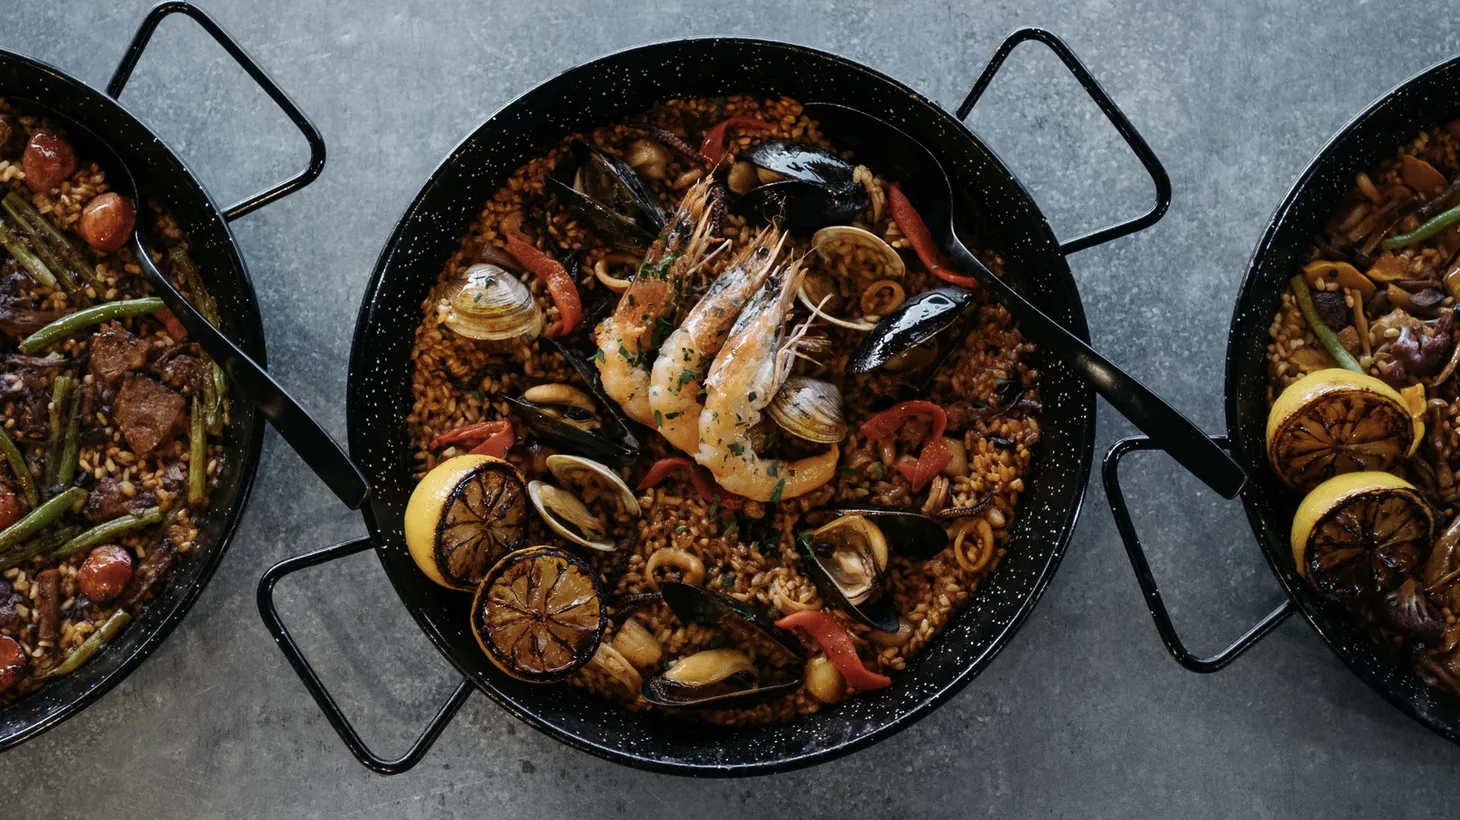 Women-centered hospitality and mentoring organizations are hosting this year’s Regarding Her Festival. Try Paella Night with chefs Kim Prince and Sandra Cordero at Gasolina Cafe (paella pictured) in Woodland Hills.